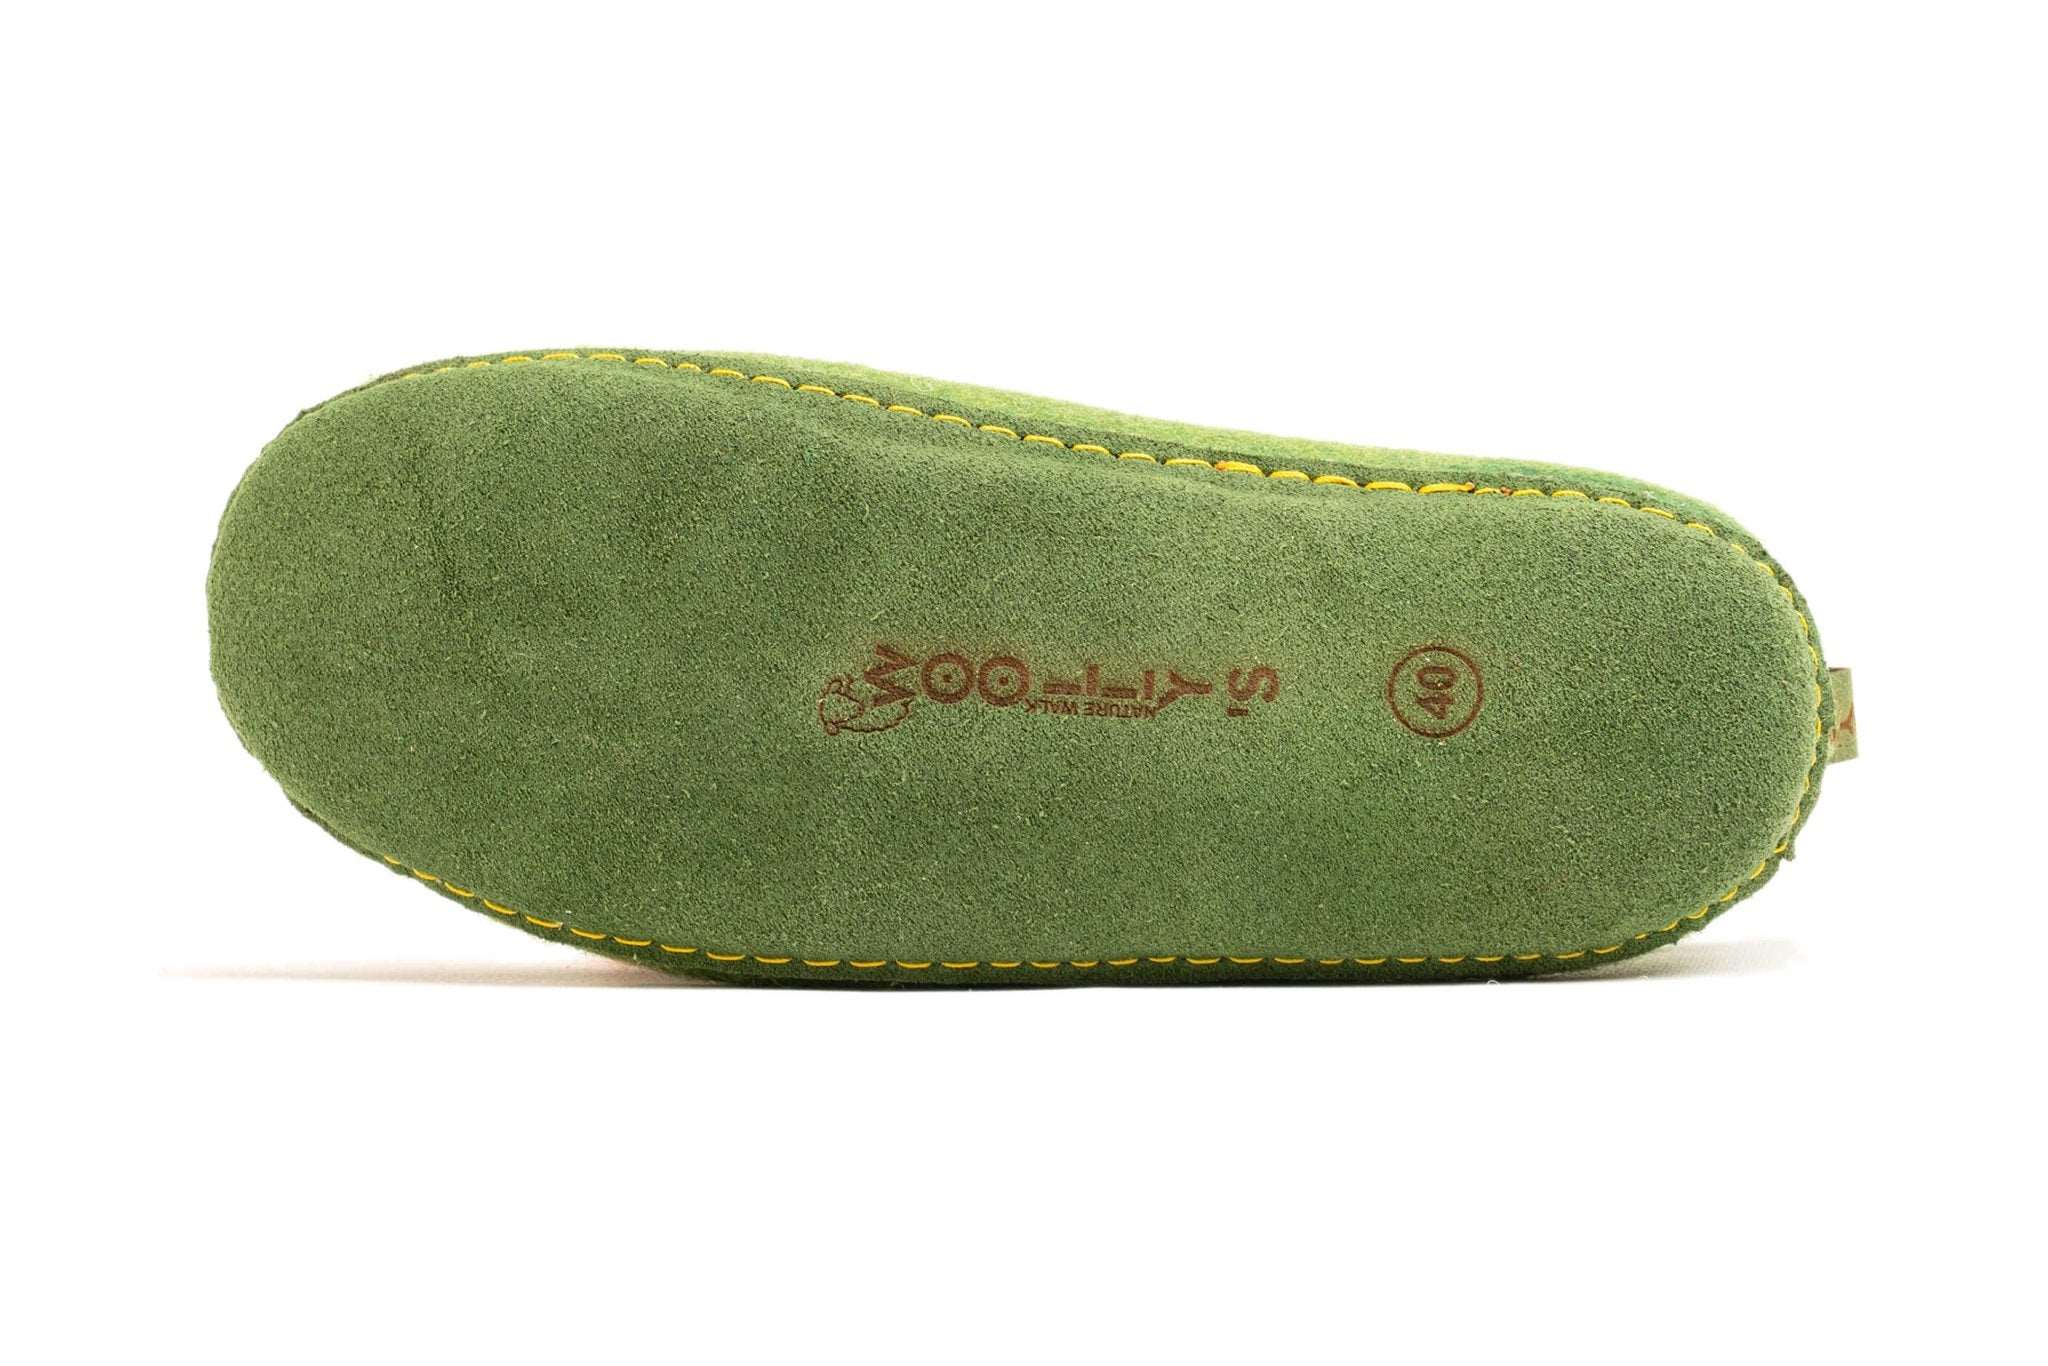 Indoor Shoes With Leather Sole - Green - Woollyes